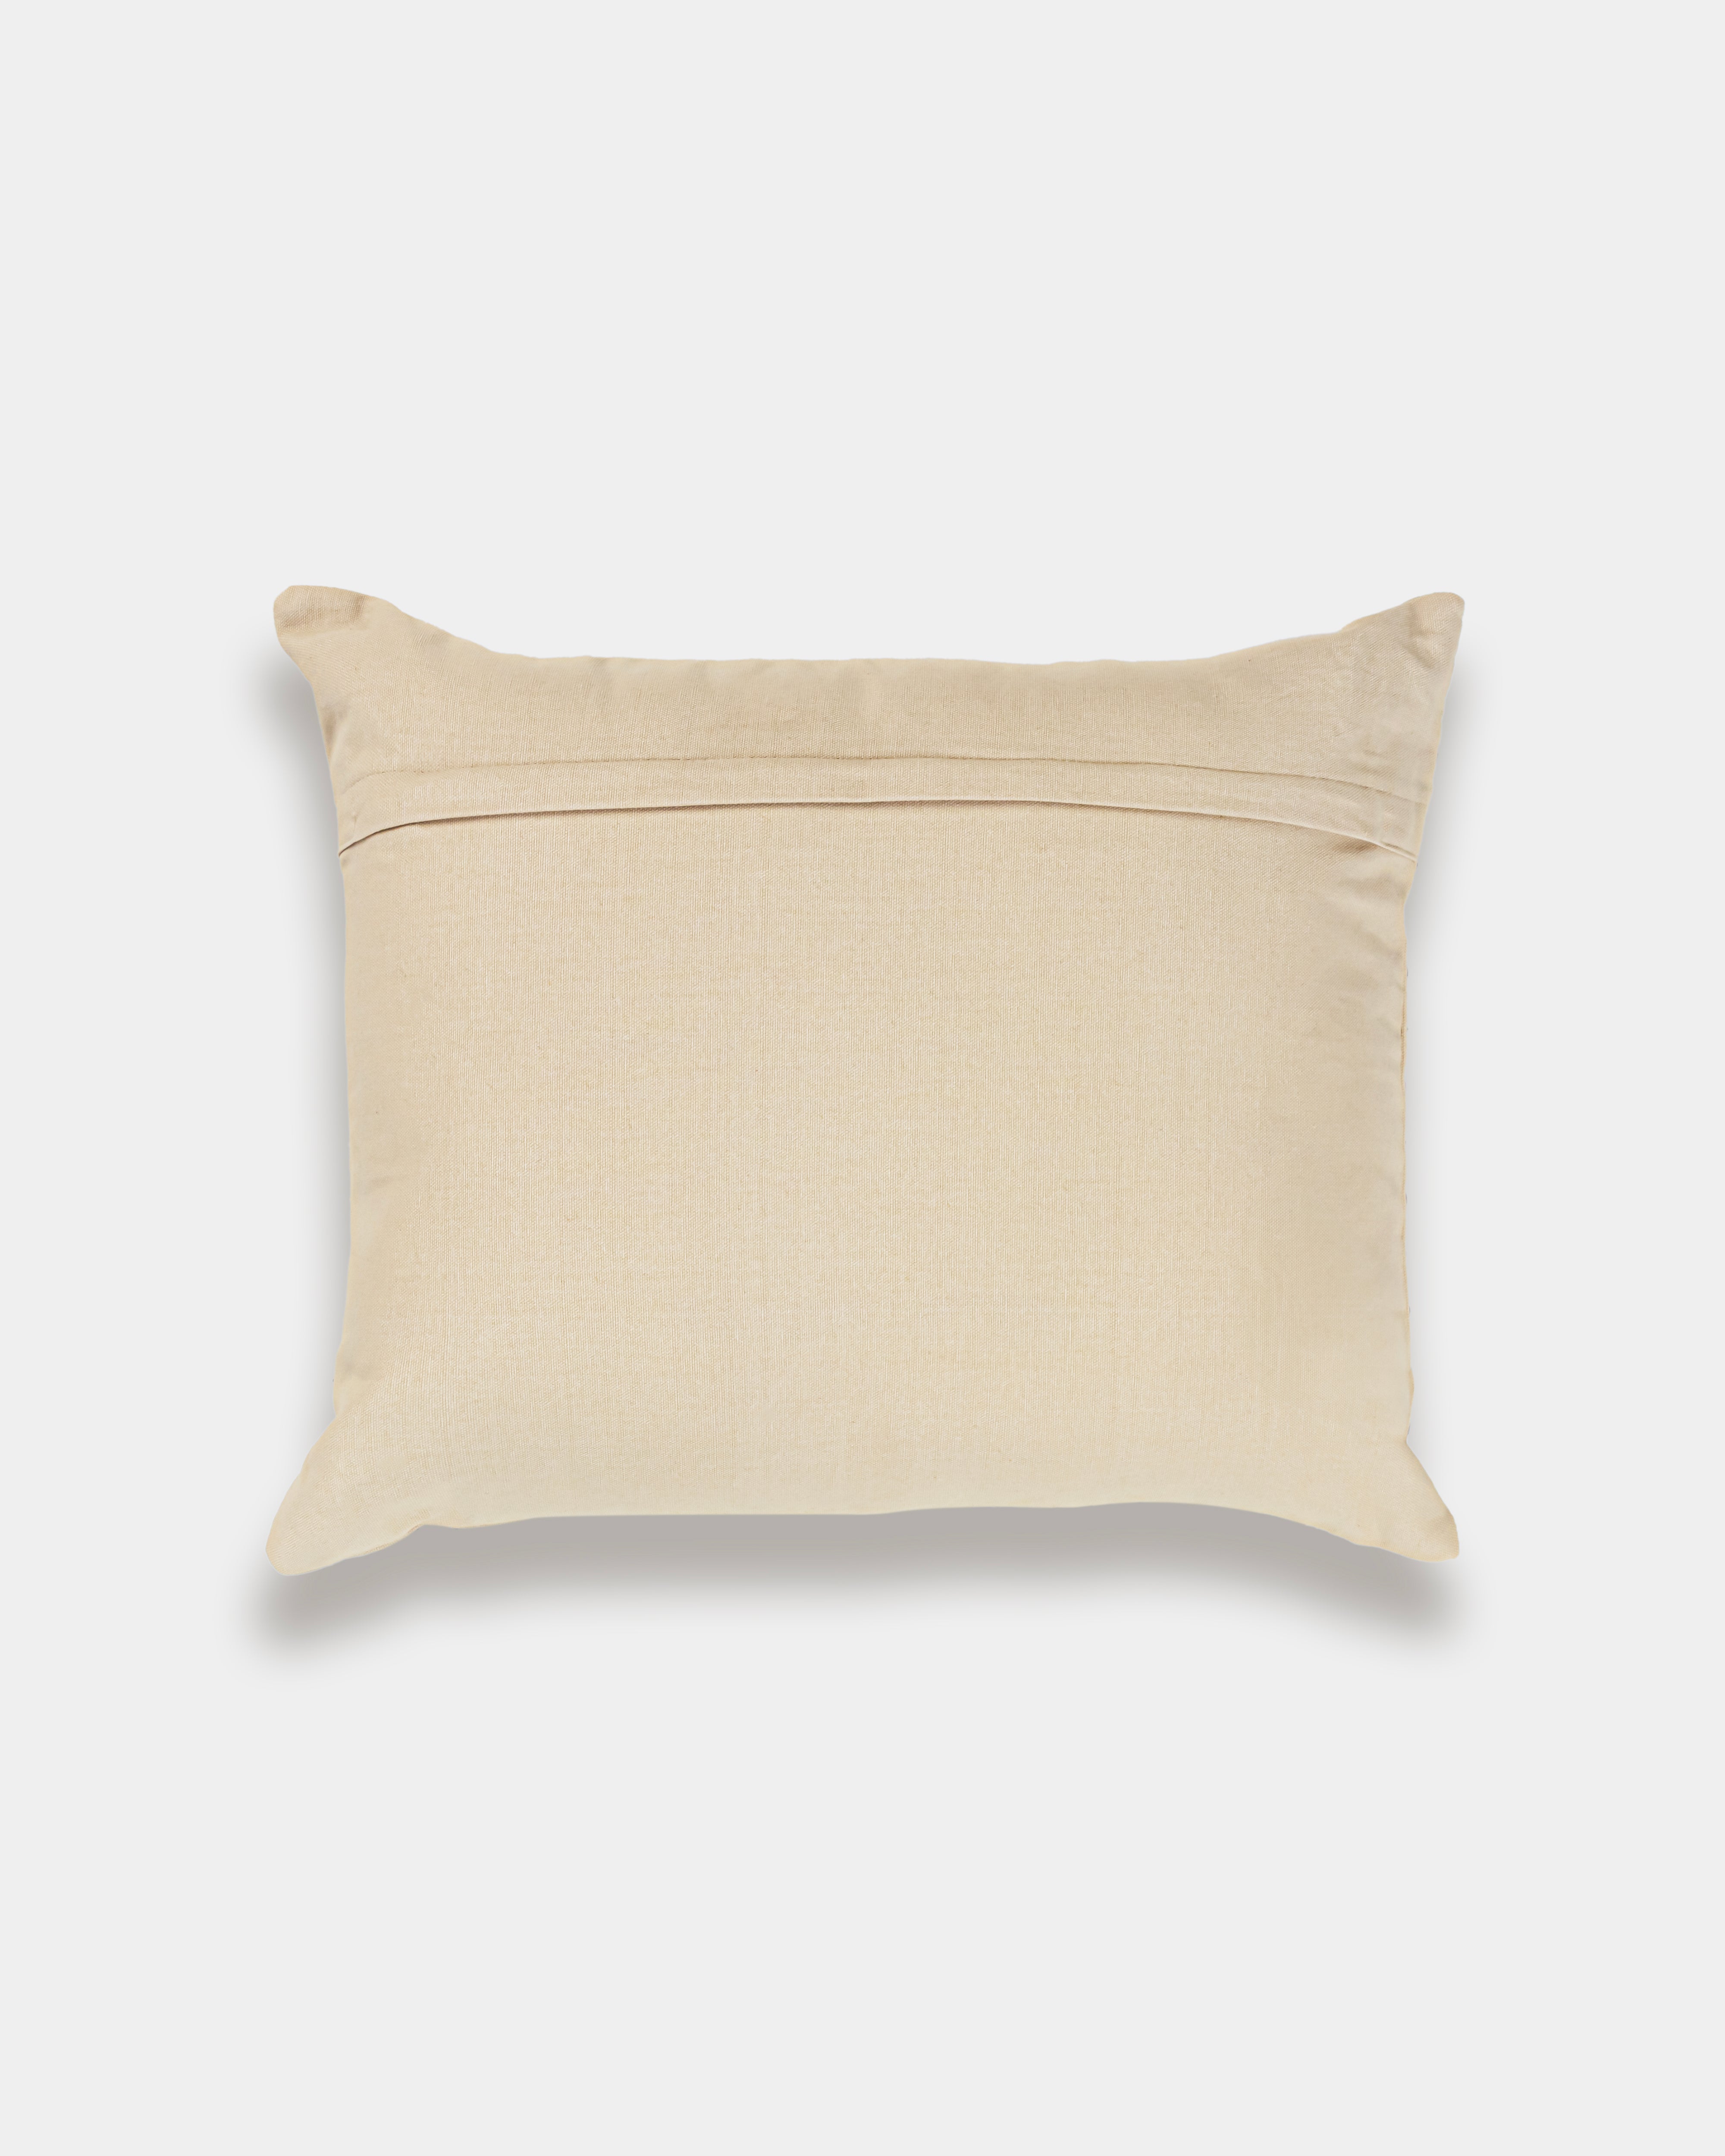 Suzani Pillow | Ivory Pillow Cover Foliage 18x18" | Made in Jaipur